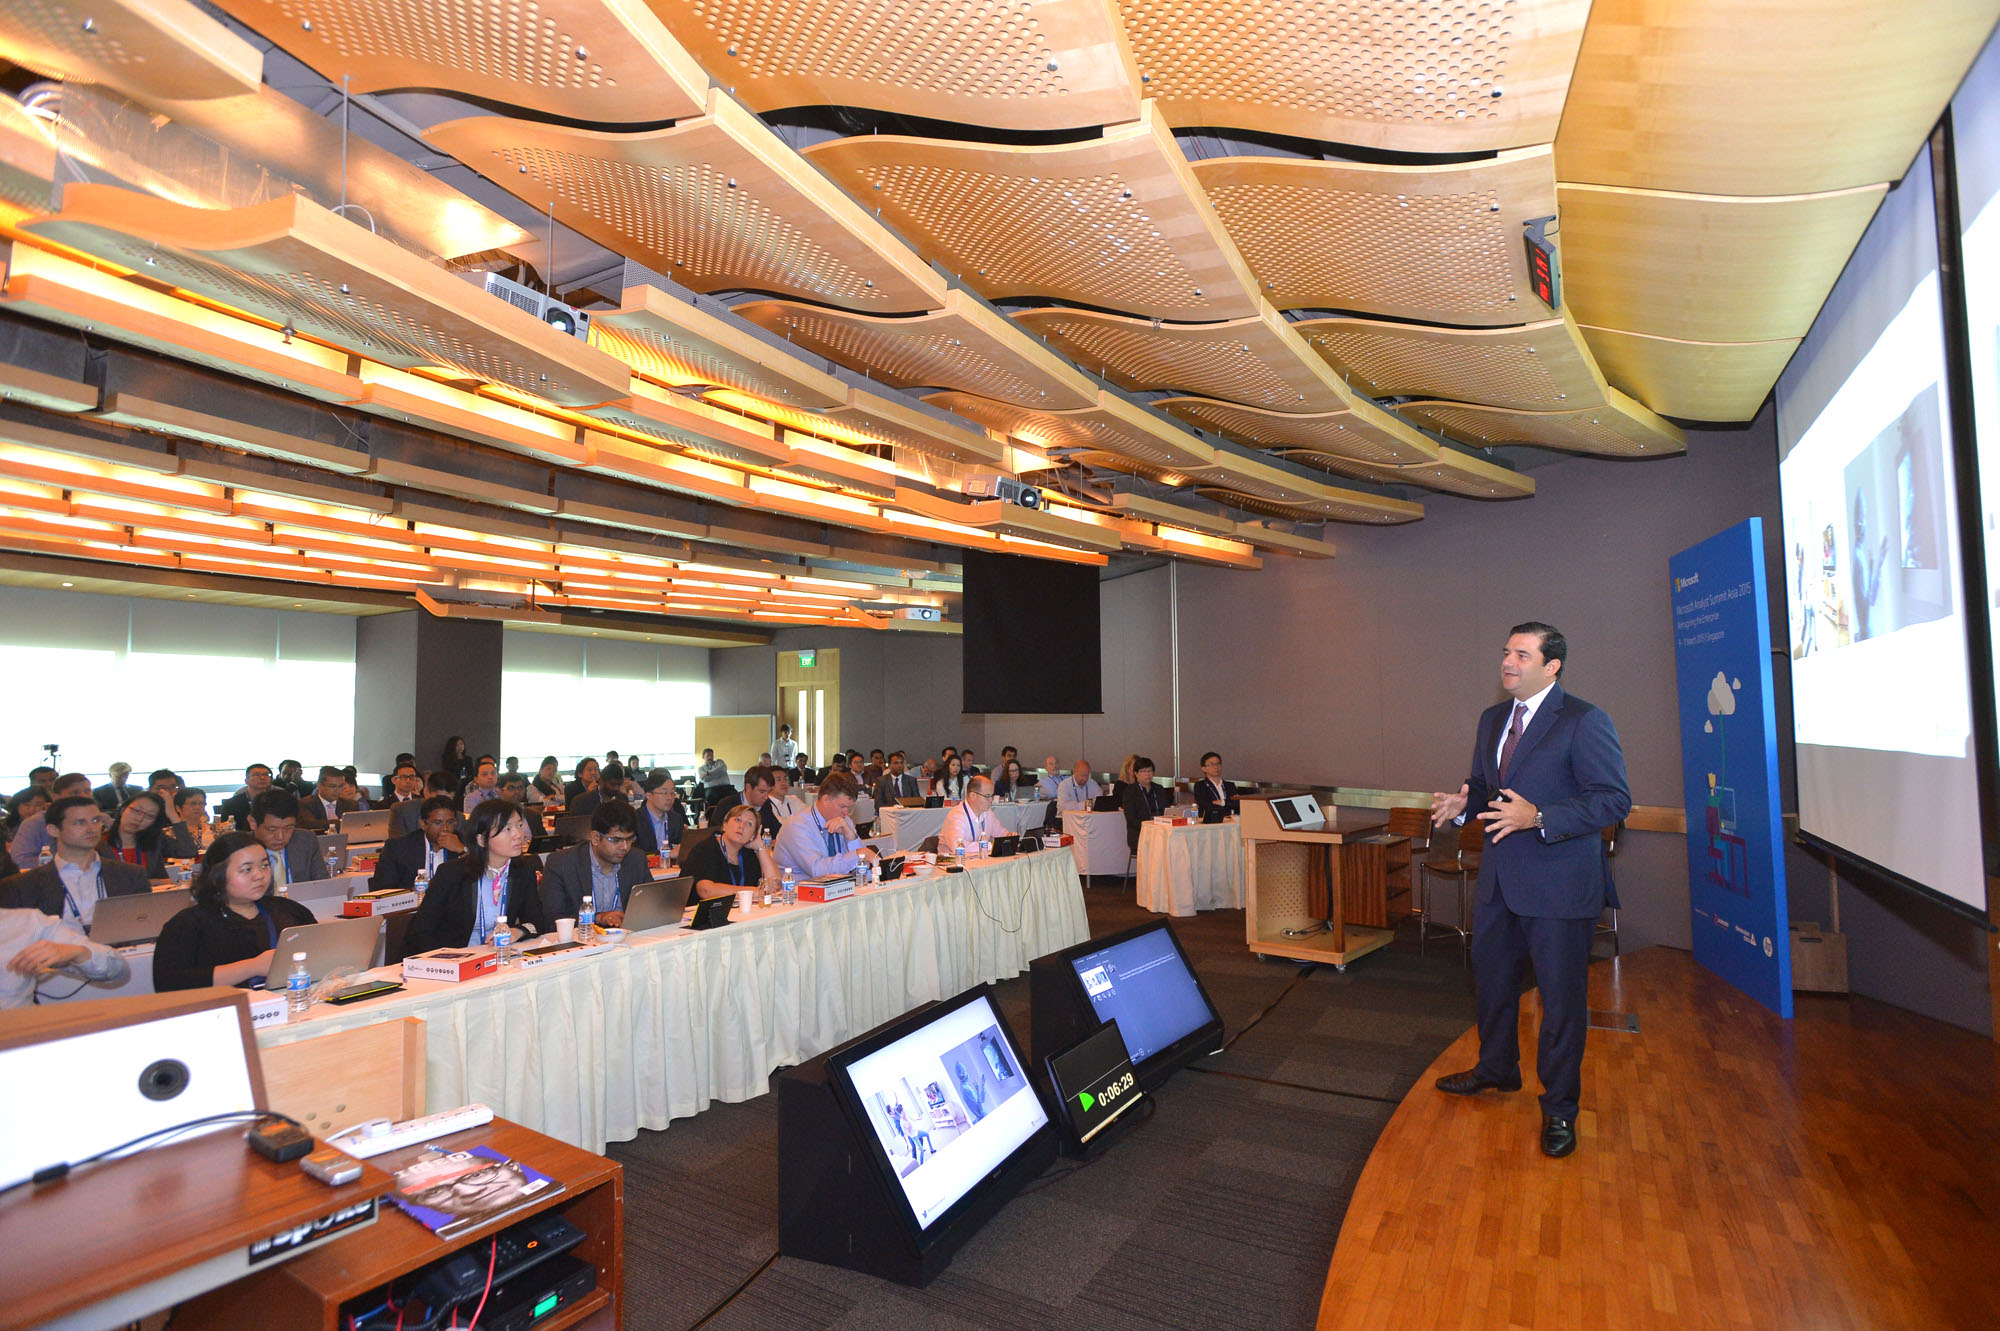 This year’s Microsoft Analyst Summit is attended by more than 80 analysts from around the Asia Pacific region.